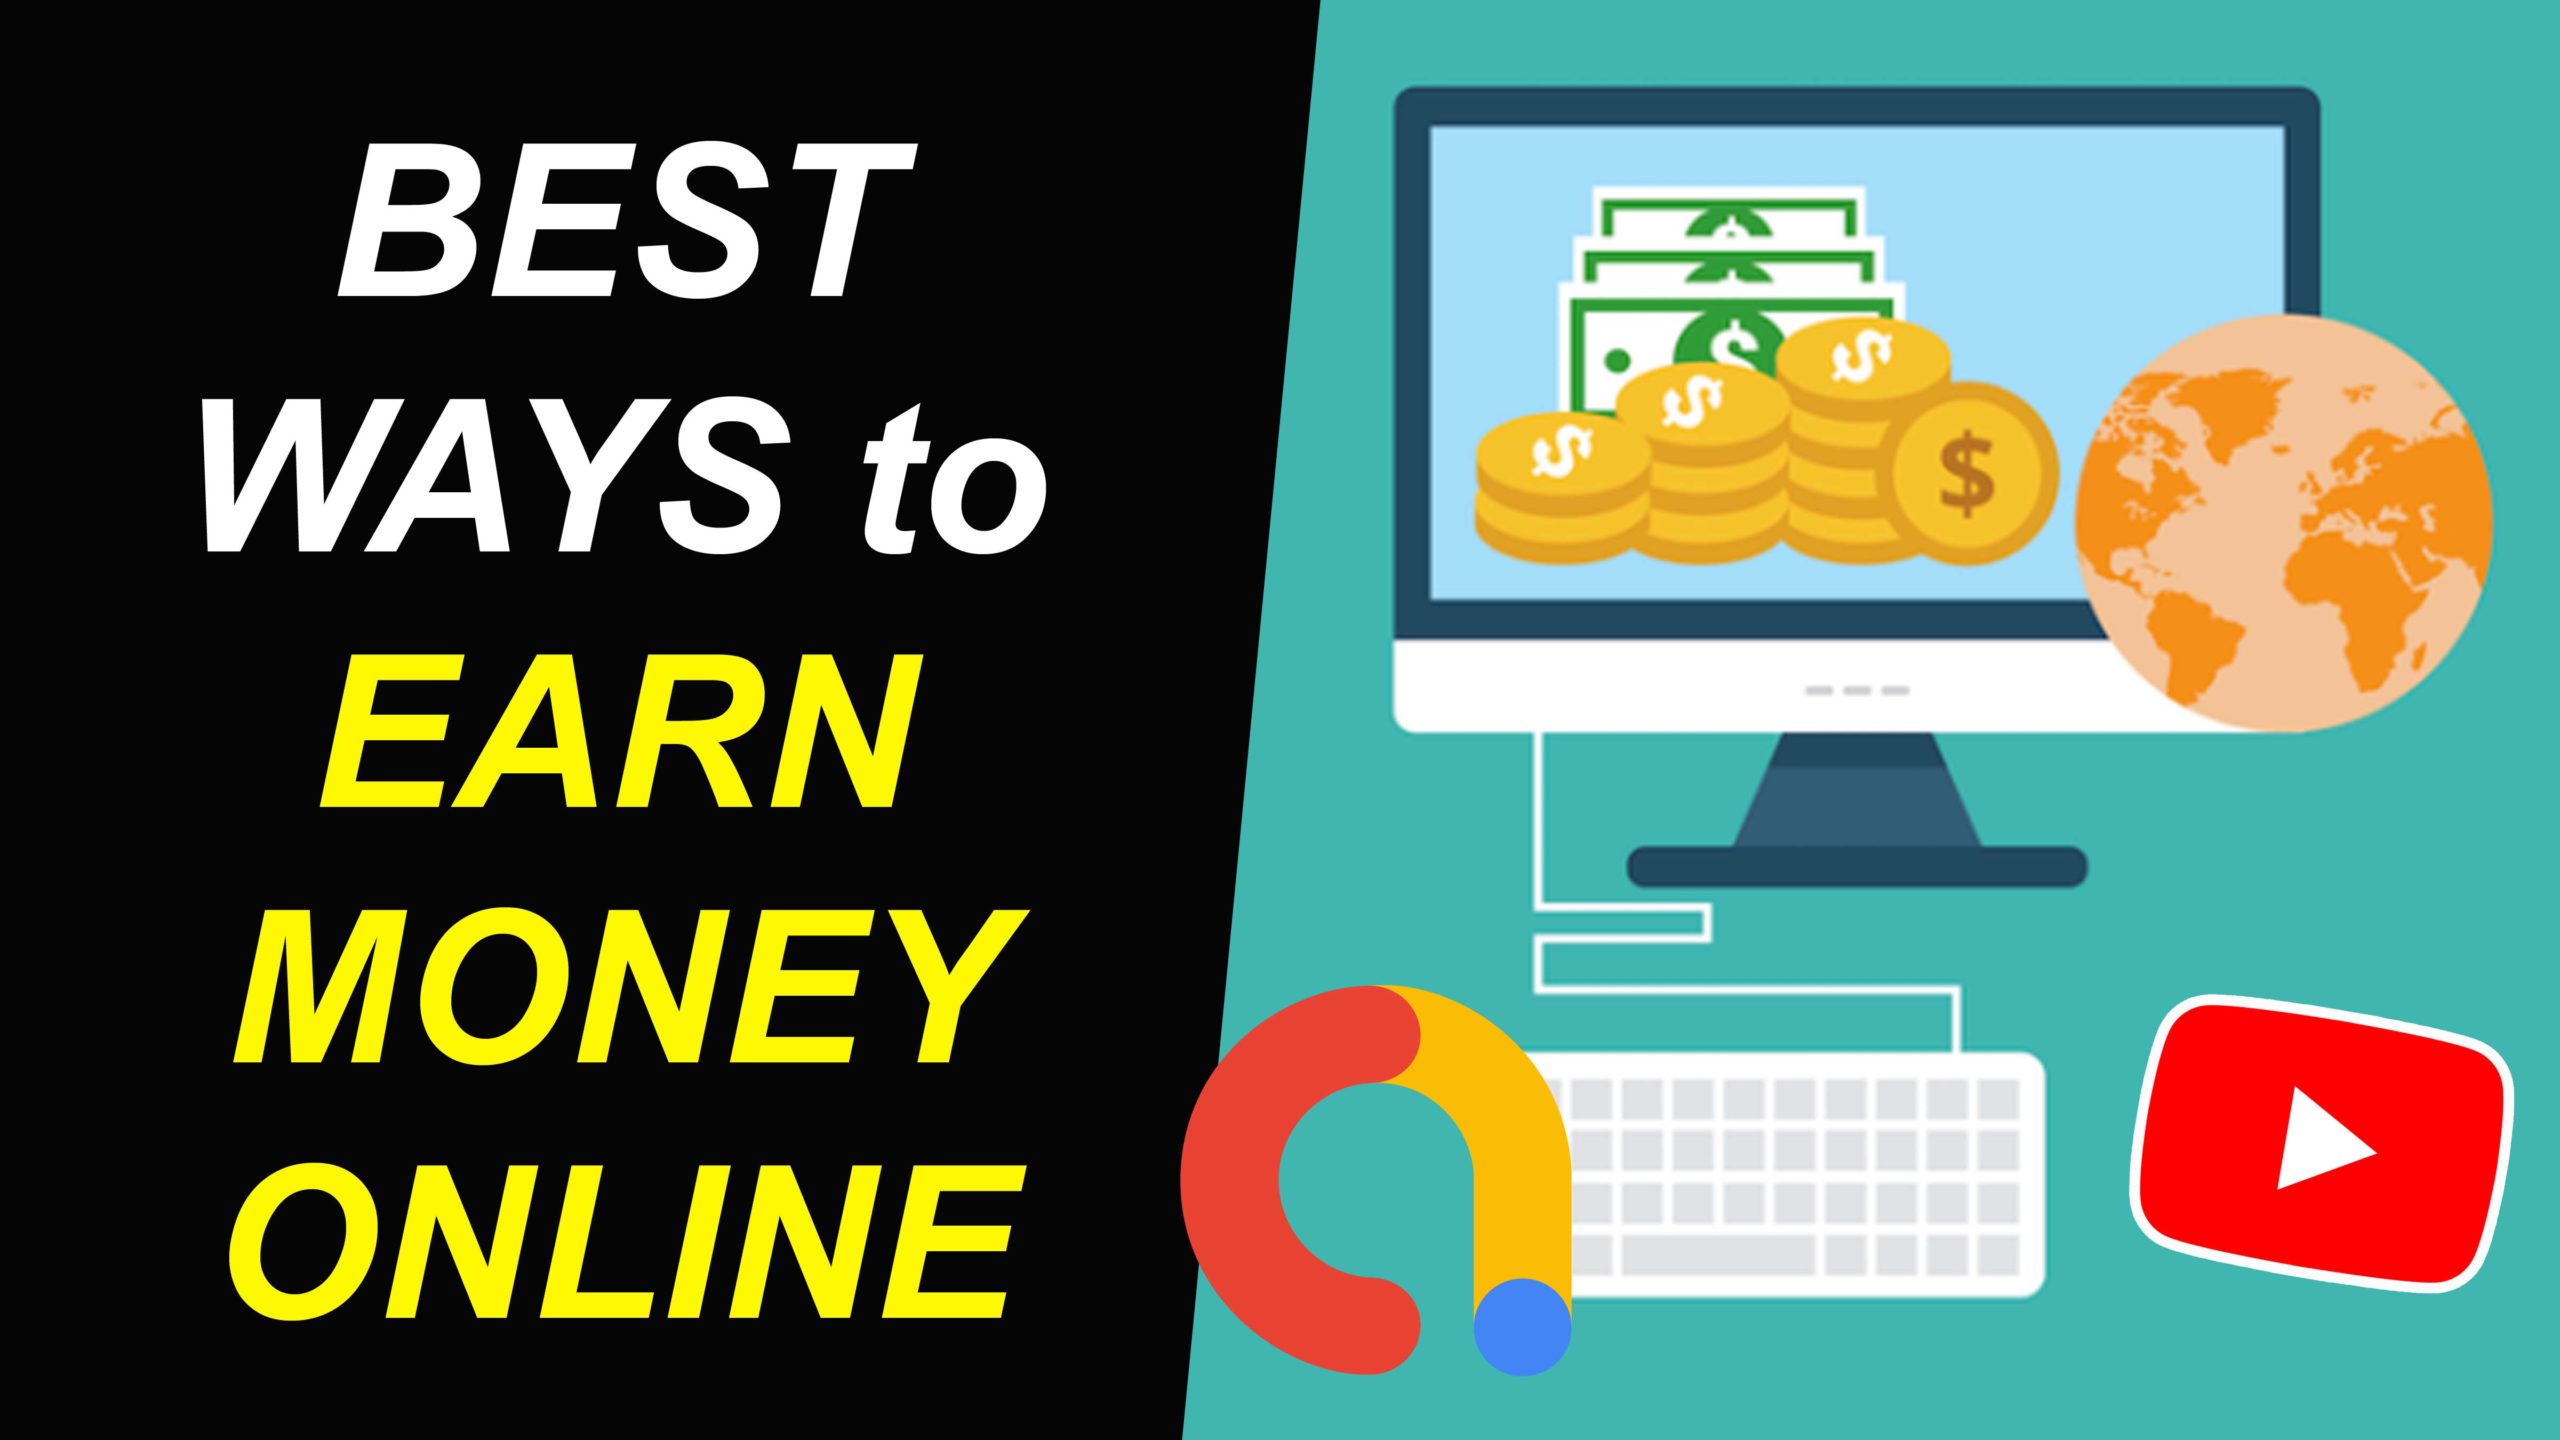 How to earn Money online? - The Hear UP